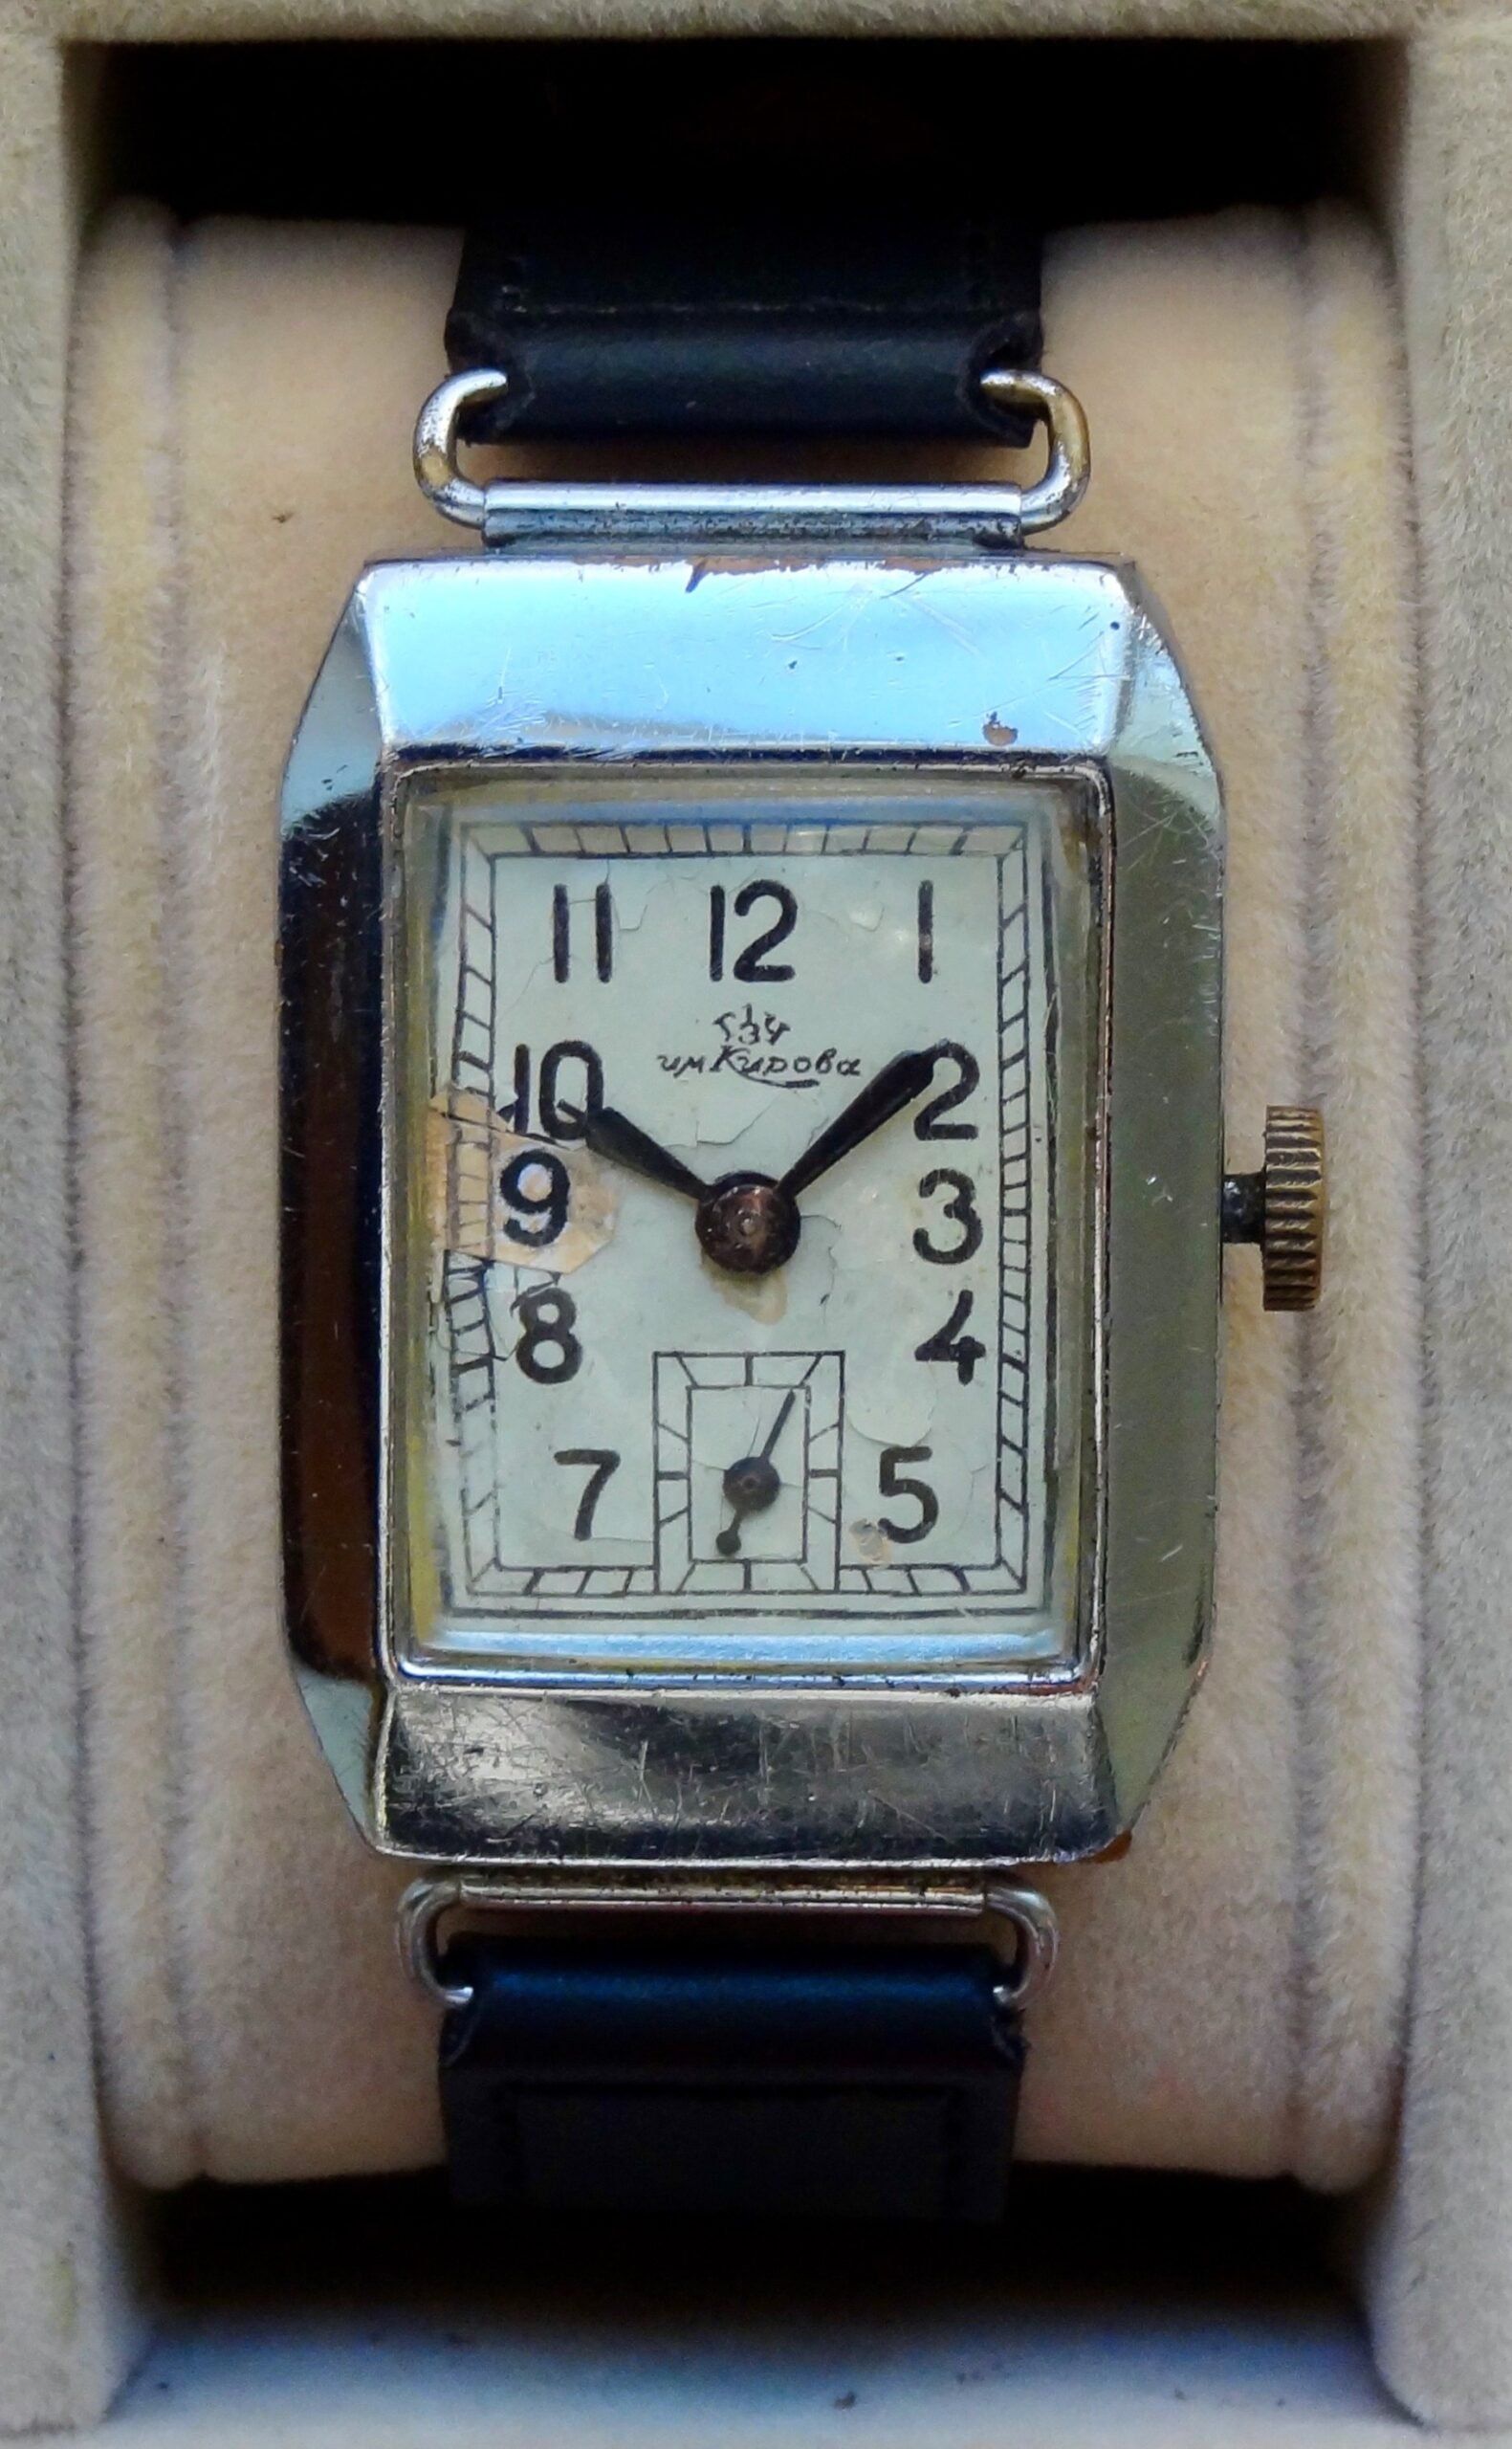 1SWF Type-17, “The Brick” watch (Courtesy: Dashiell Stanford; https://mroatman.wixsite.com/watches-of-the-ussr)